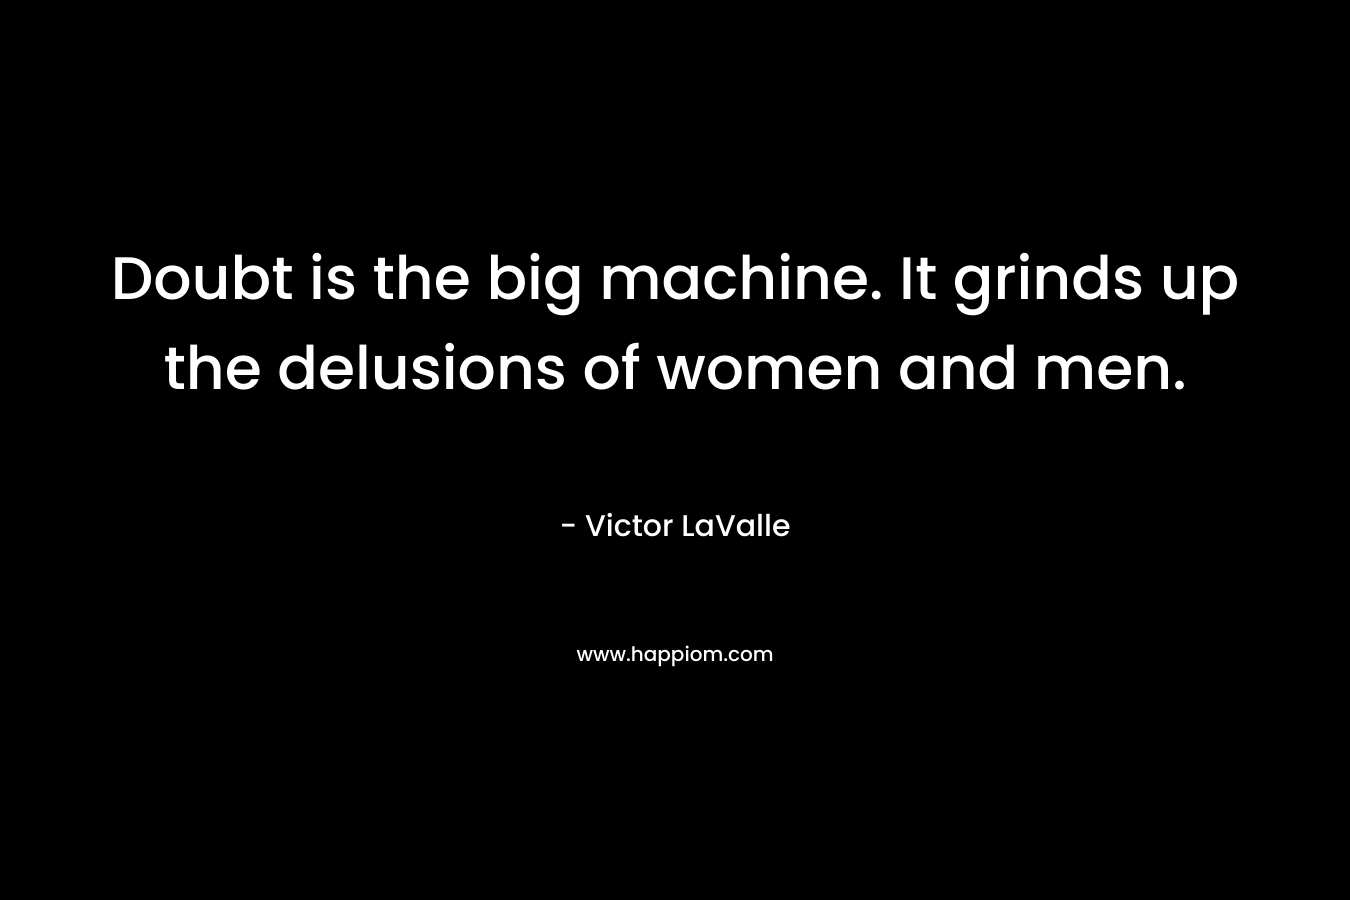 Doubt is the big machine. It grinds up the delusions of women and men. – Victor LaValle